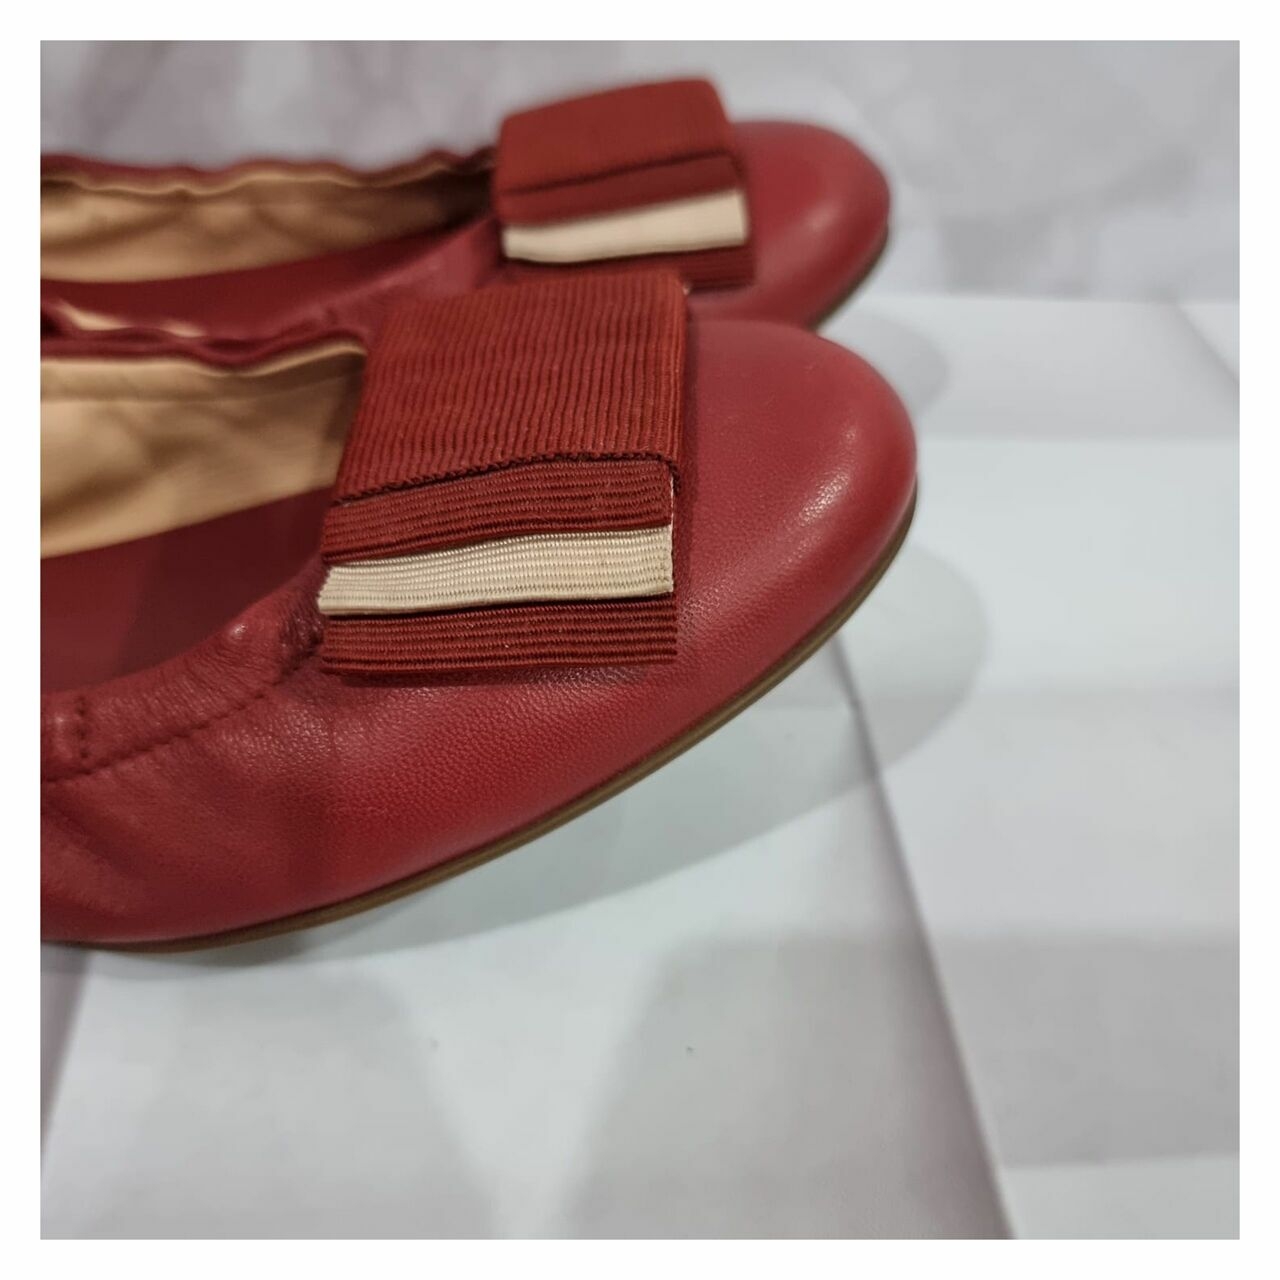 Bally Ballerina Leather Red Flats